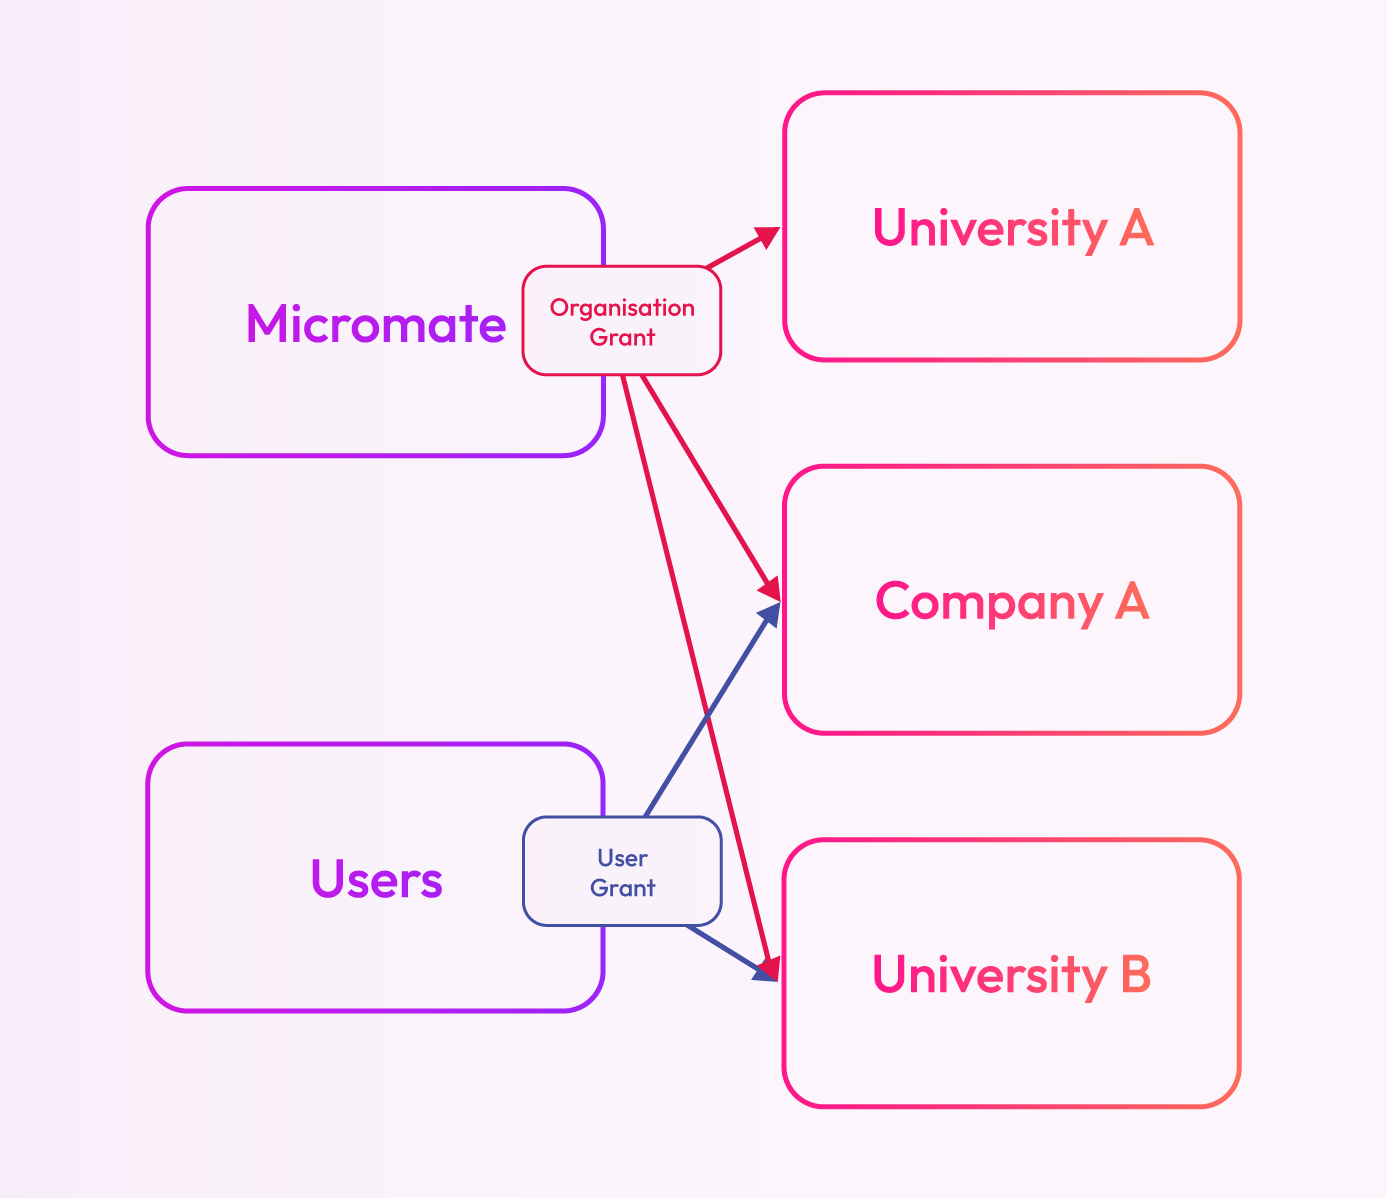 Diagram showing Micromate and User Organization with Grants to different Tenants